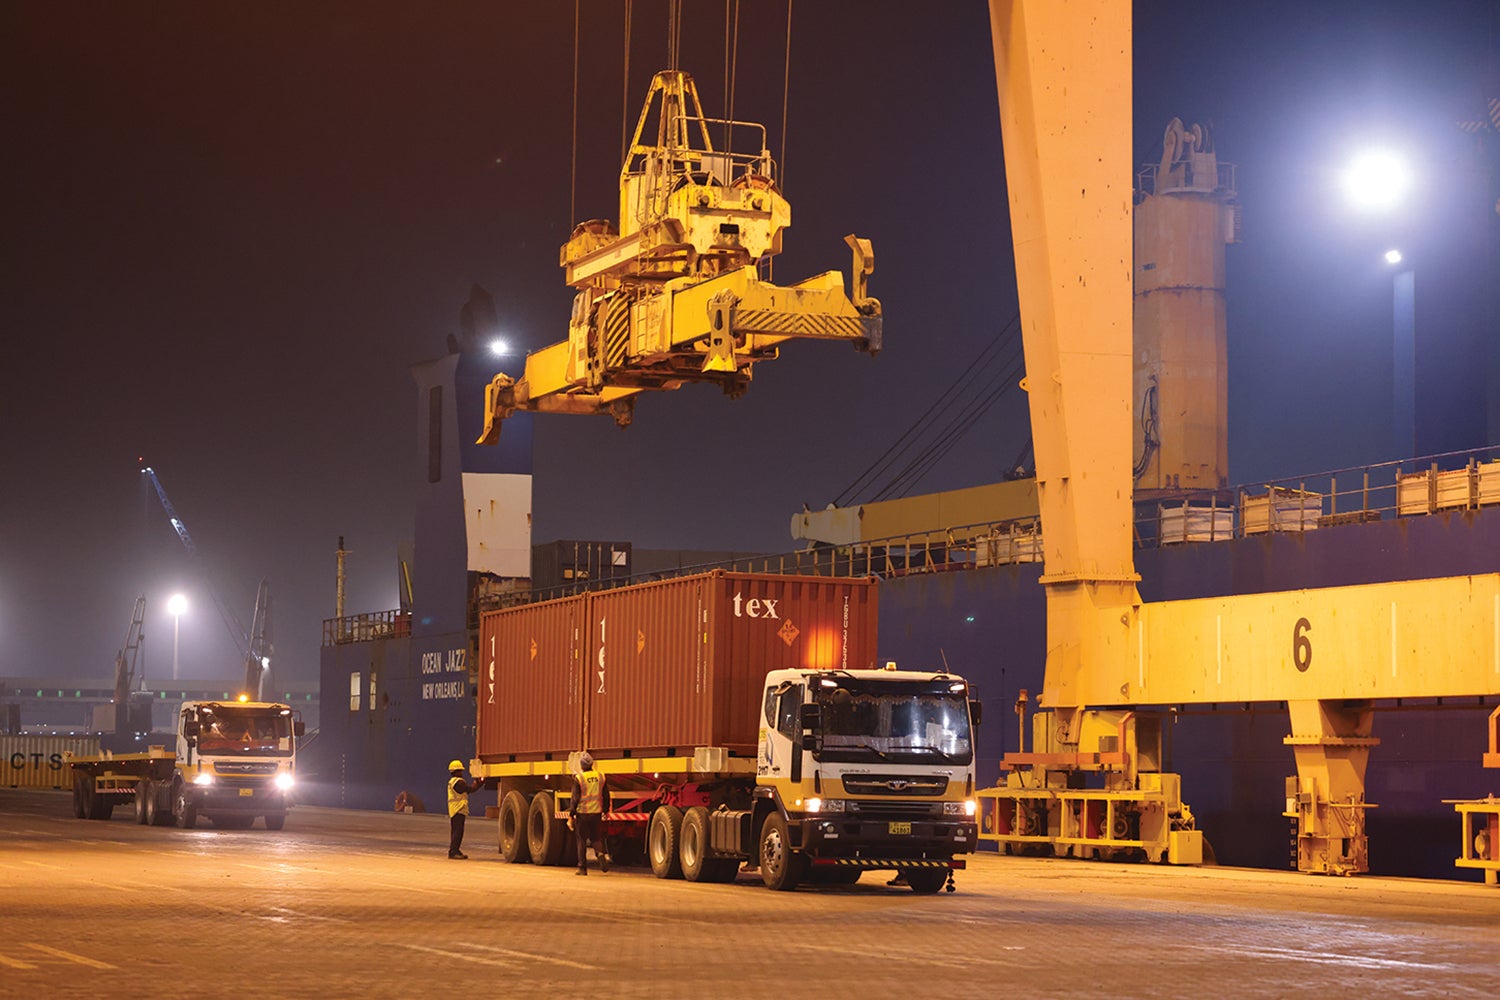 U.S. soldiers train for cargo operations at the Port of Shuaiba, Kuwait. (Credit: U.S. Army/Capt. Austin May)